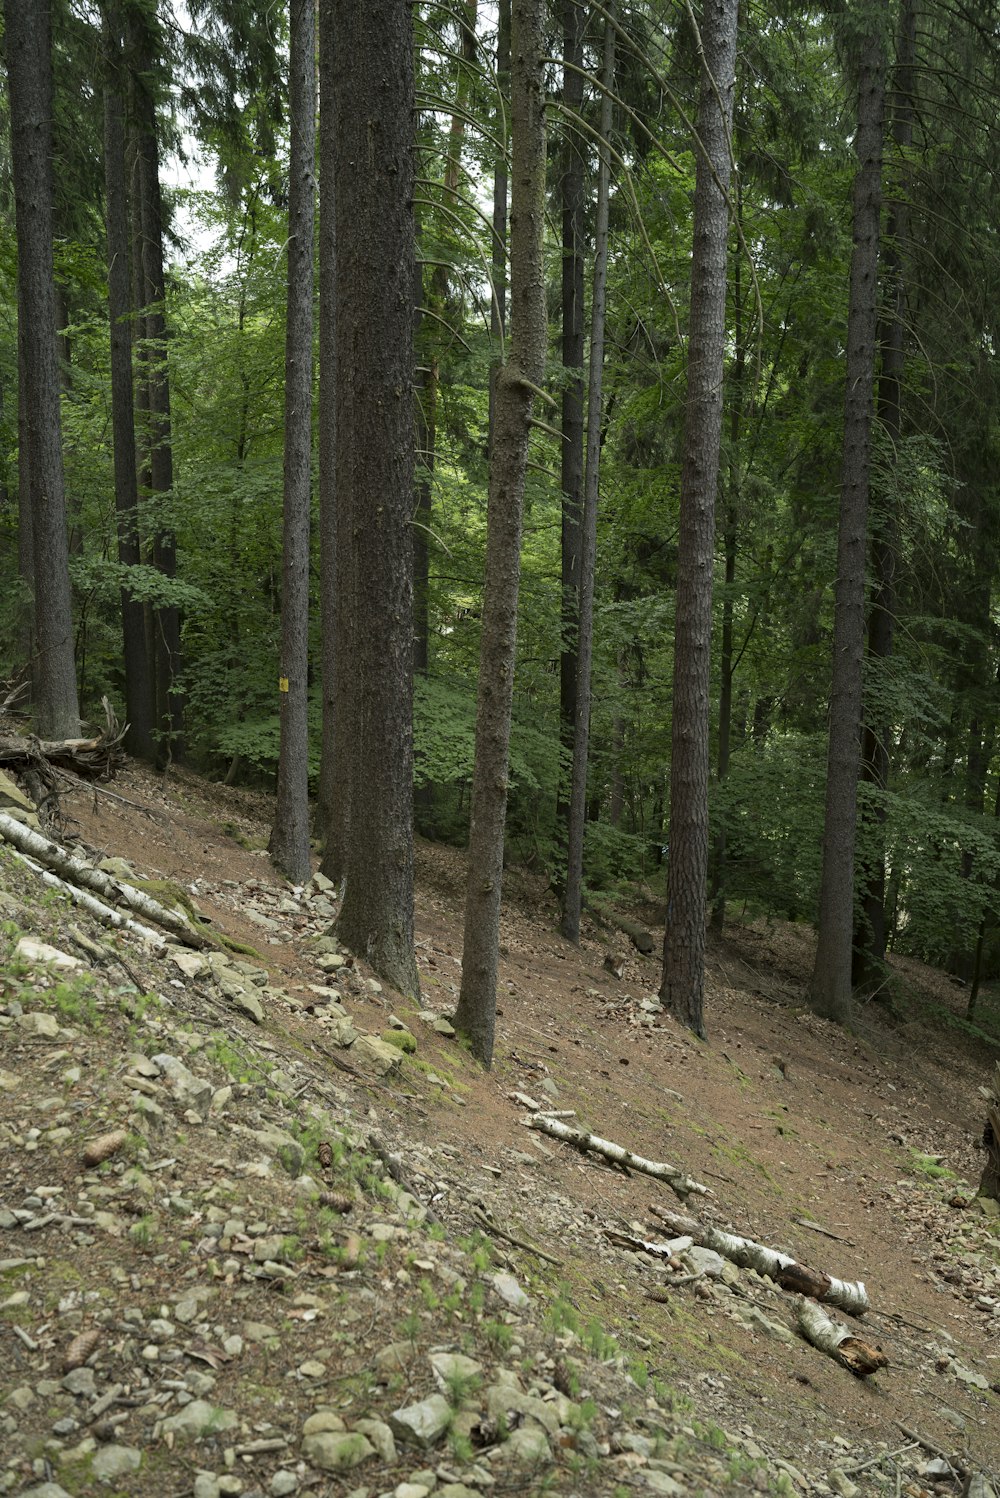 a man riding a horse through a forest filled with trees